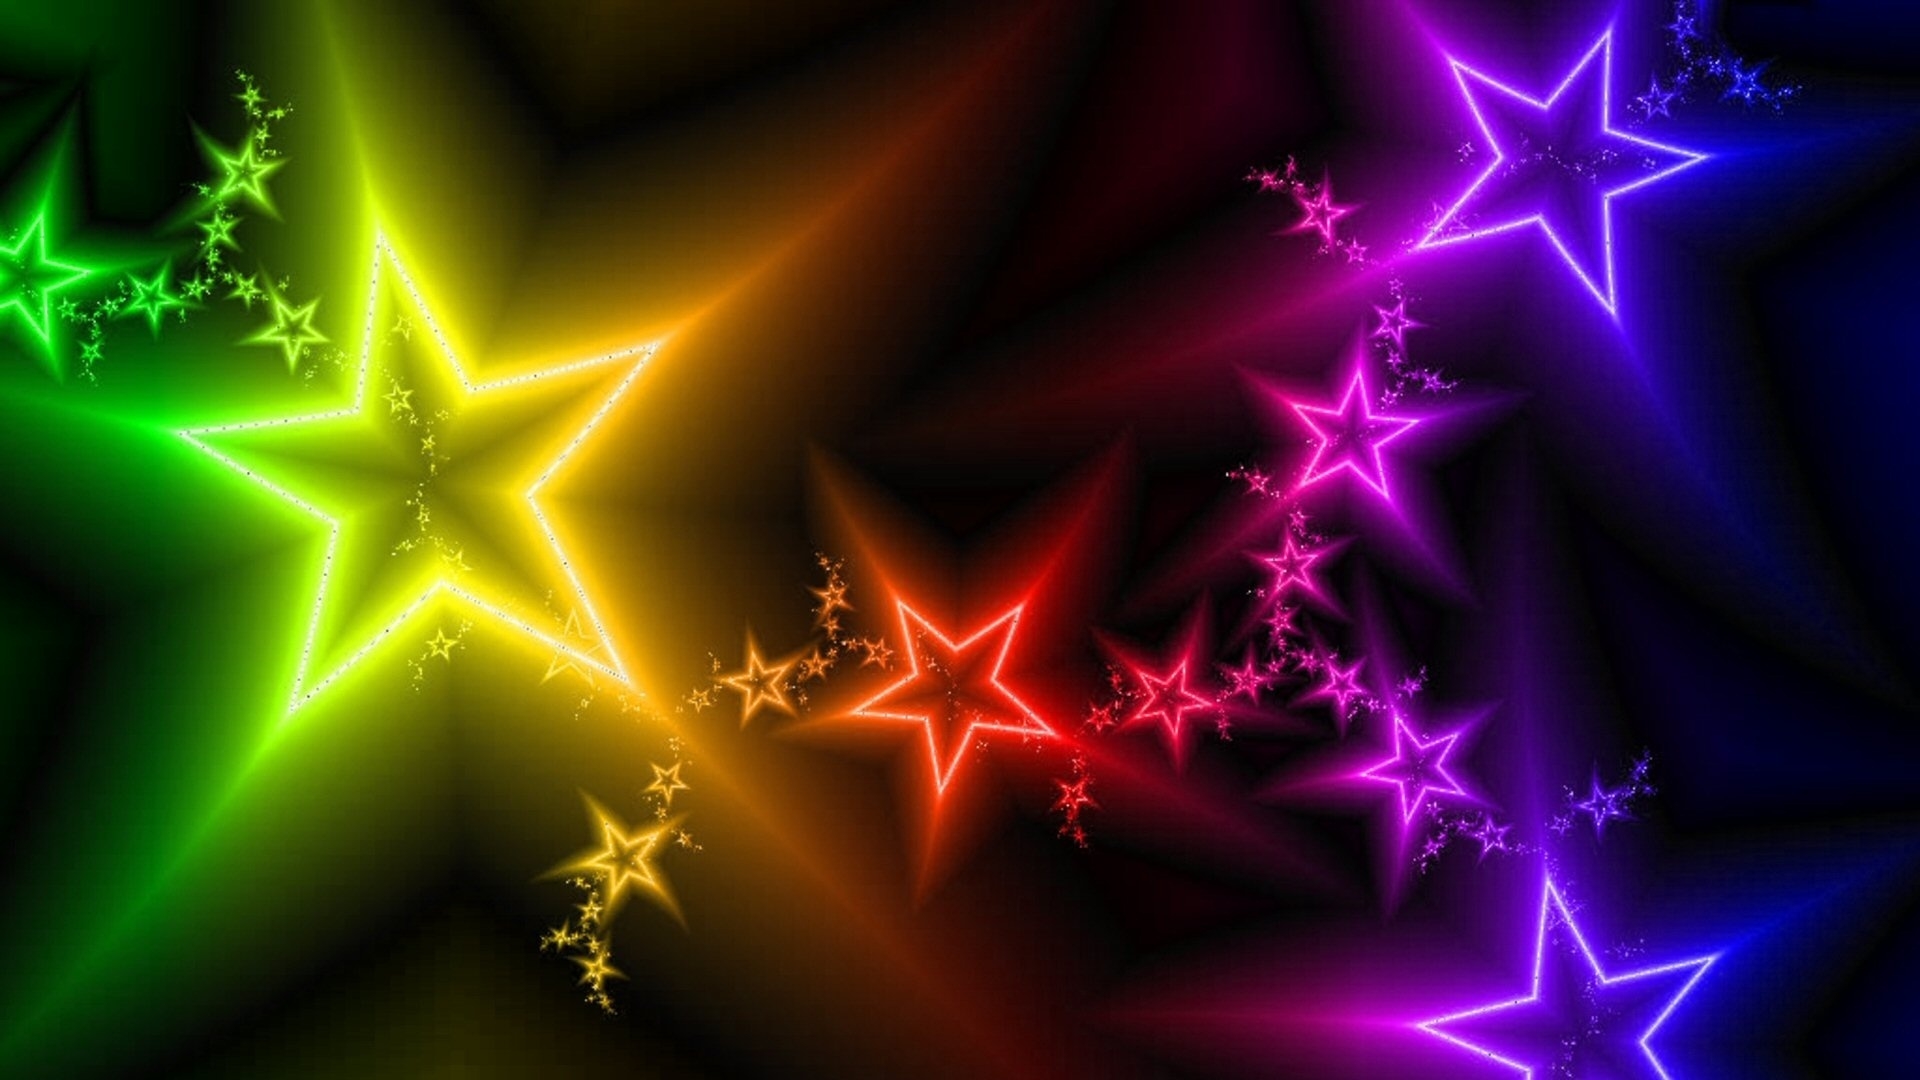 Colorful Stars Wallpapers wallpaper Colorful Stars Wallpapers hd